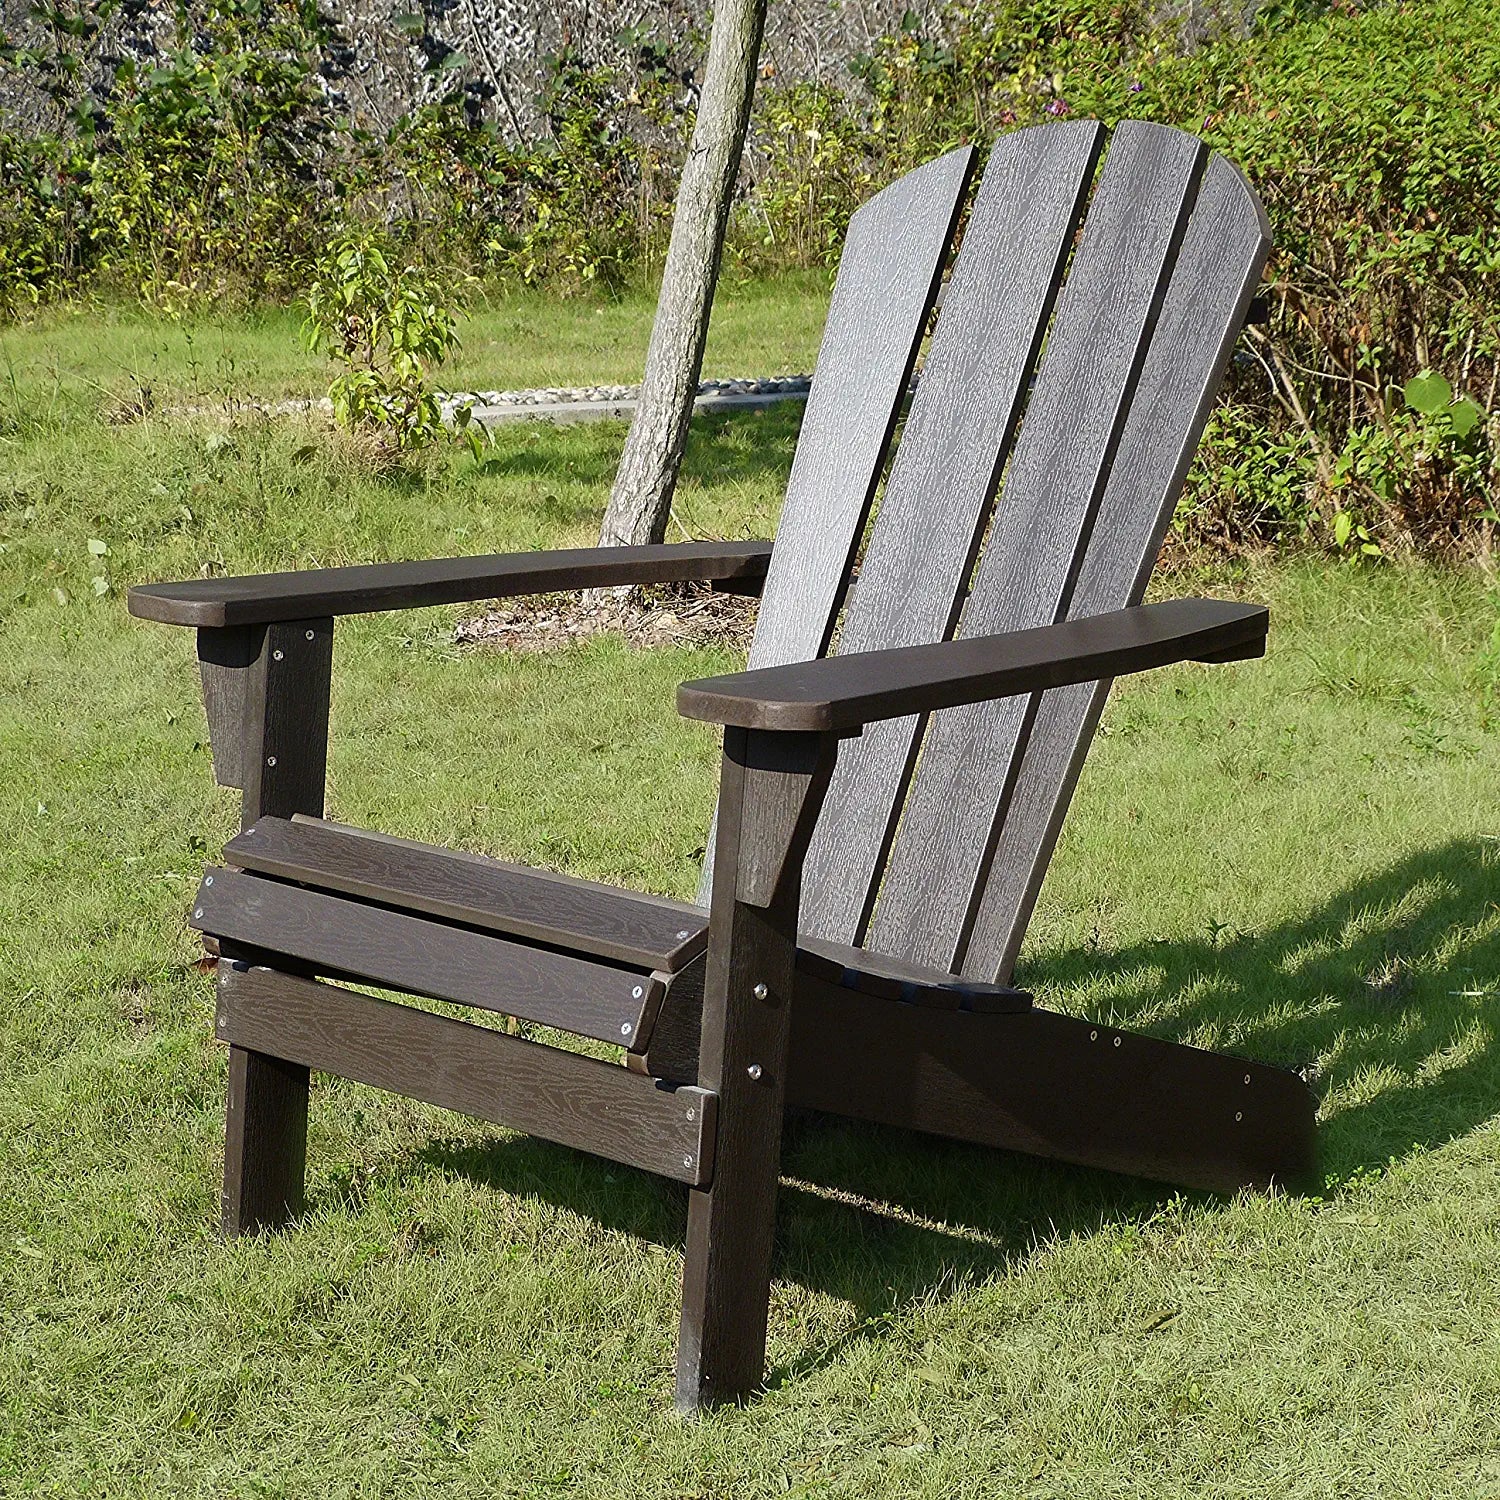 Northbeam Faux Wood Foldable Relaxed Adirondack Chair, Outdoor, Garden, Lawn, Deck Chair, Espresso